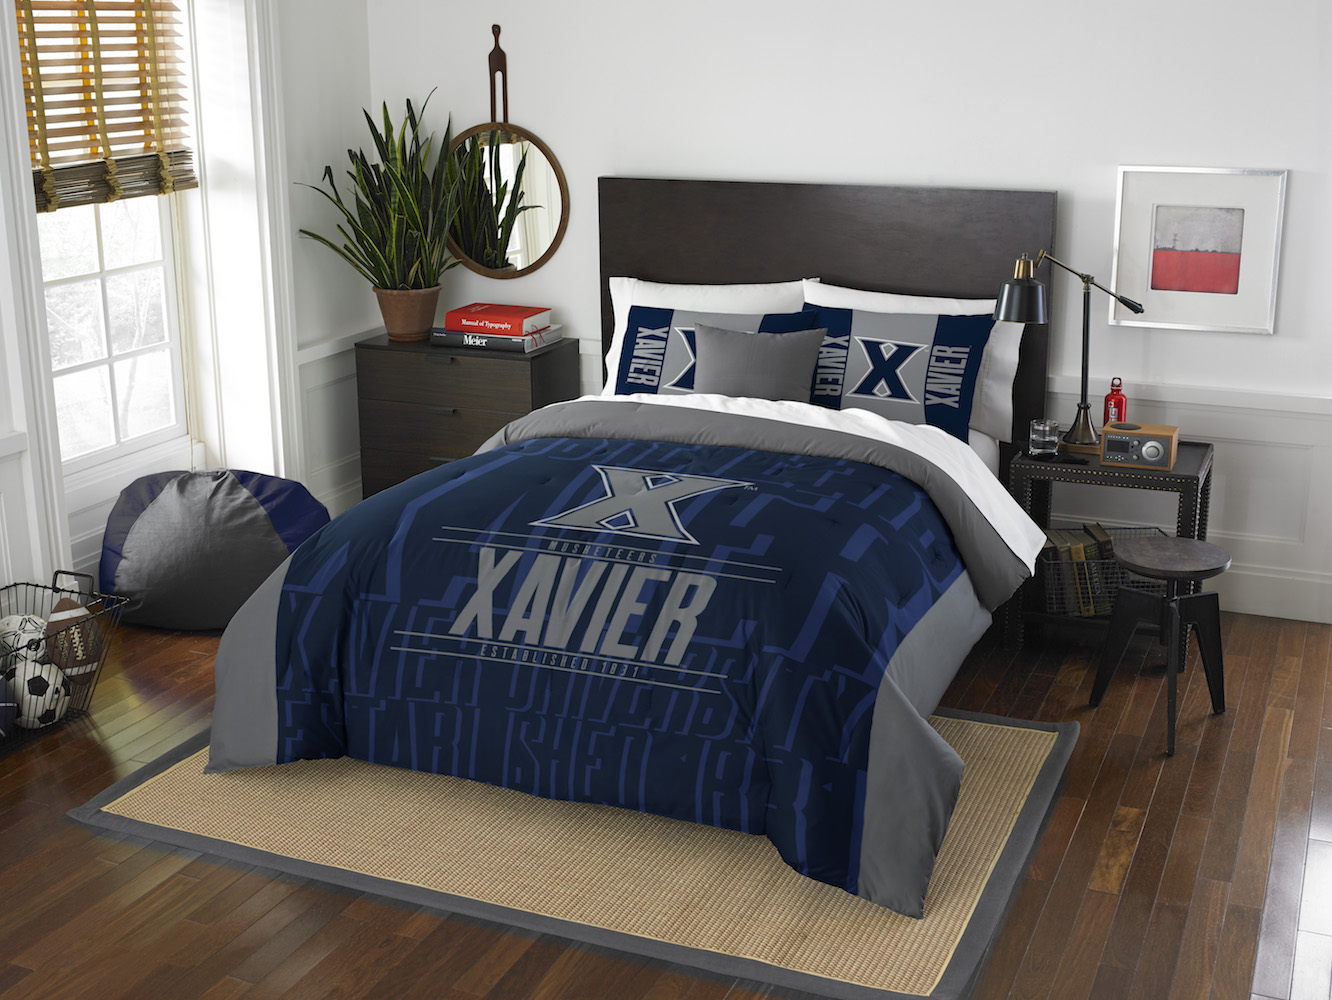 Xavier Musketeers QUEEN/FULL size Comforter and 2 Shams